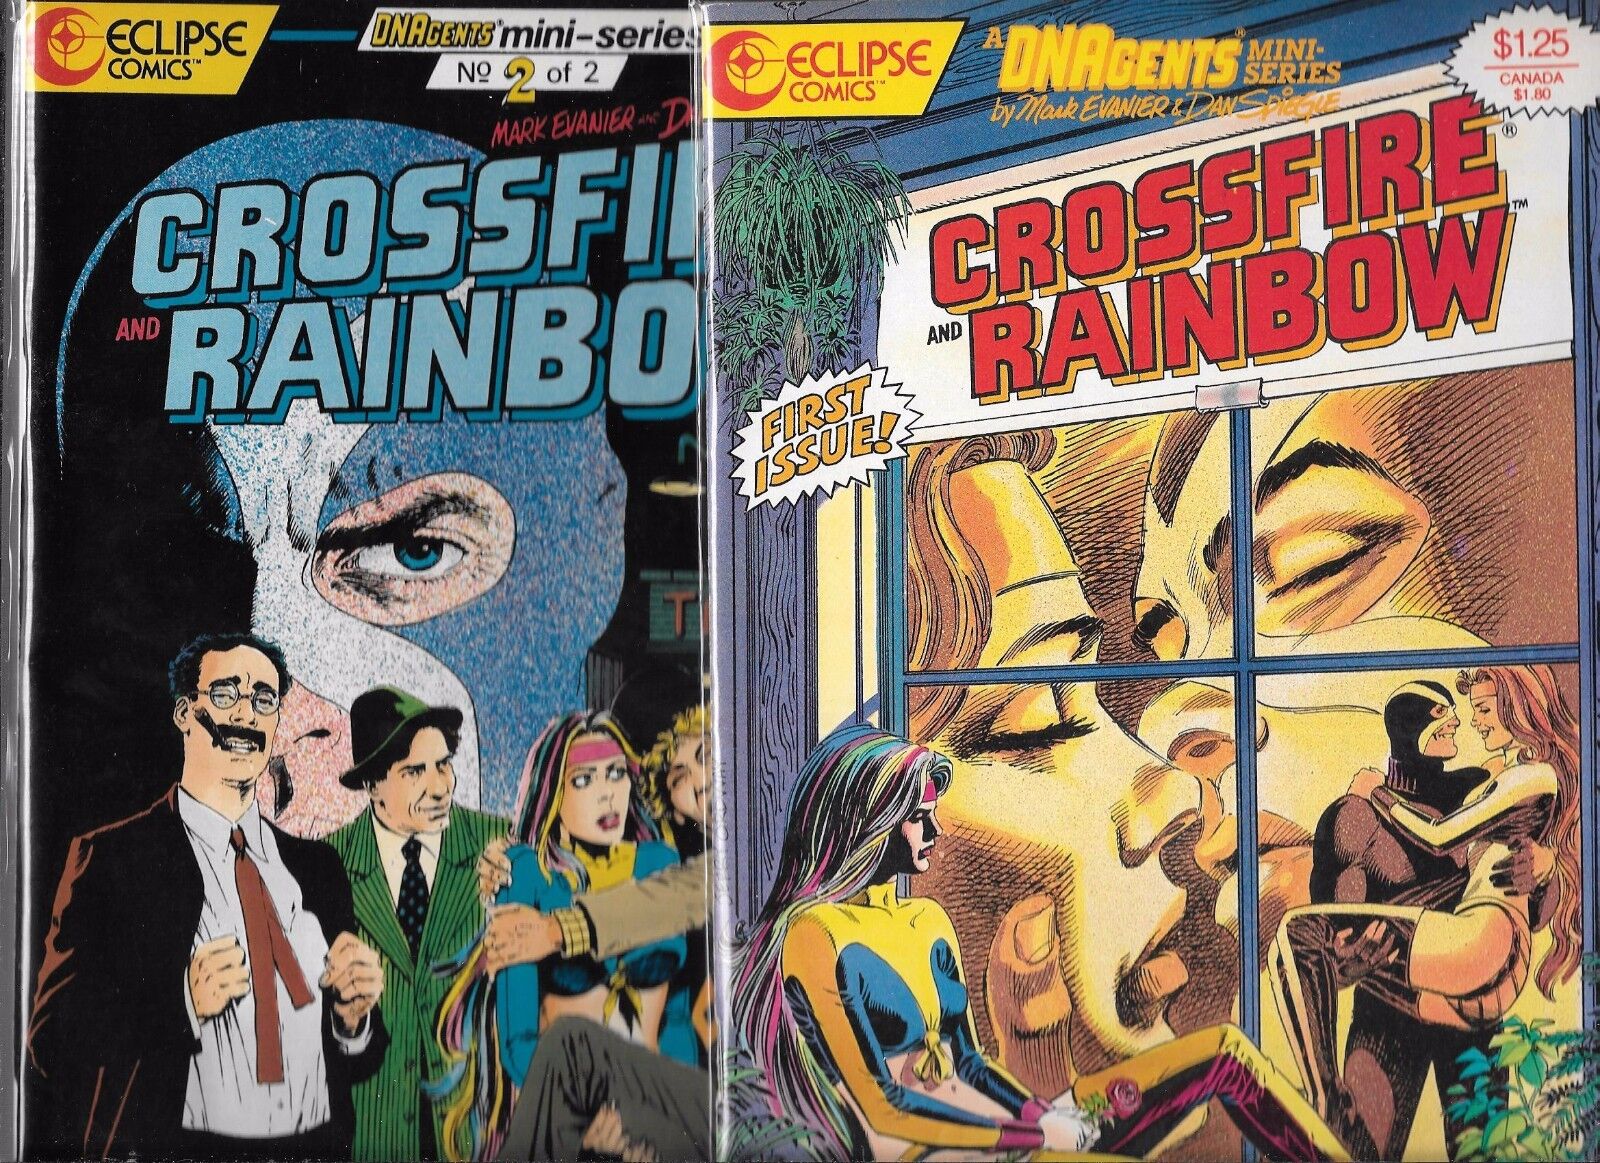 CROSSFIRE AND RAINBOW LOT OF 2- #1 #2 (NM-) HIGH GRADE COPPER AGE ECLIPSE COMICS